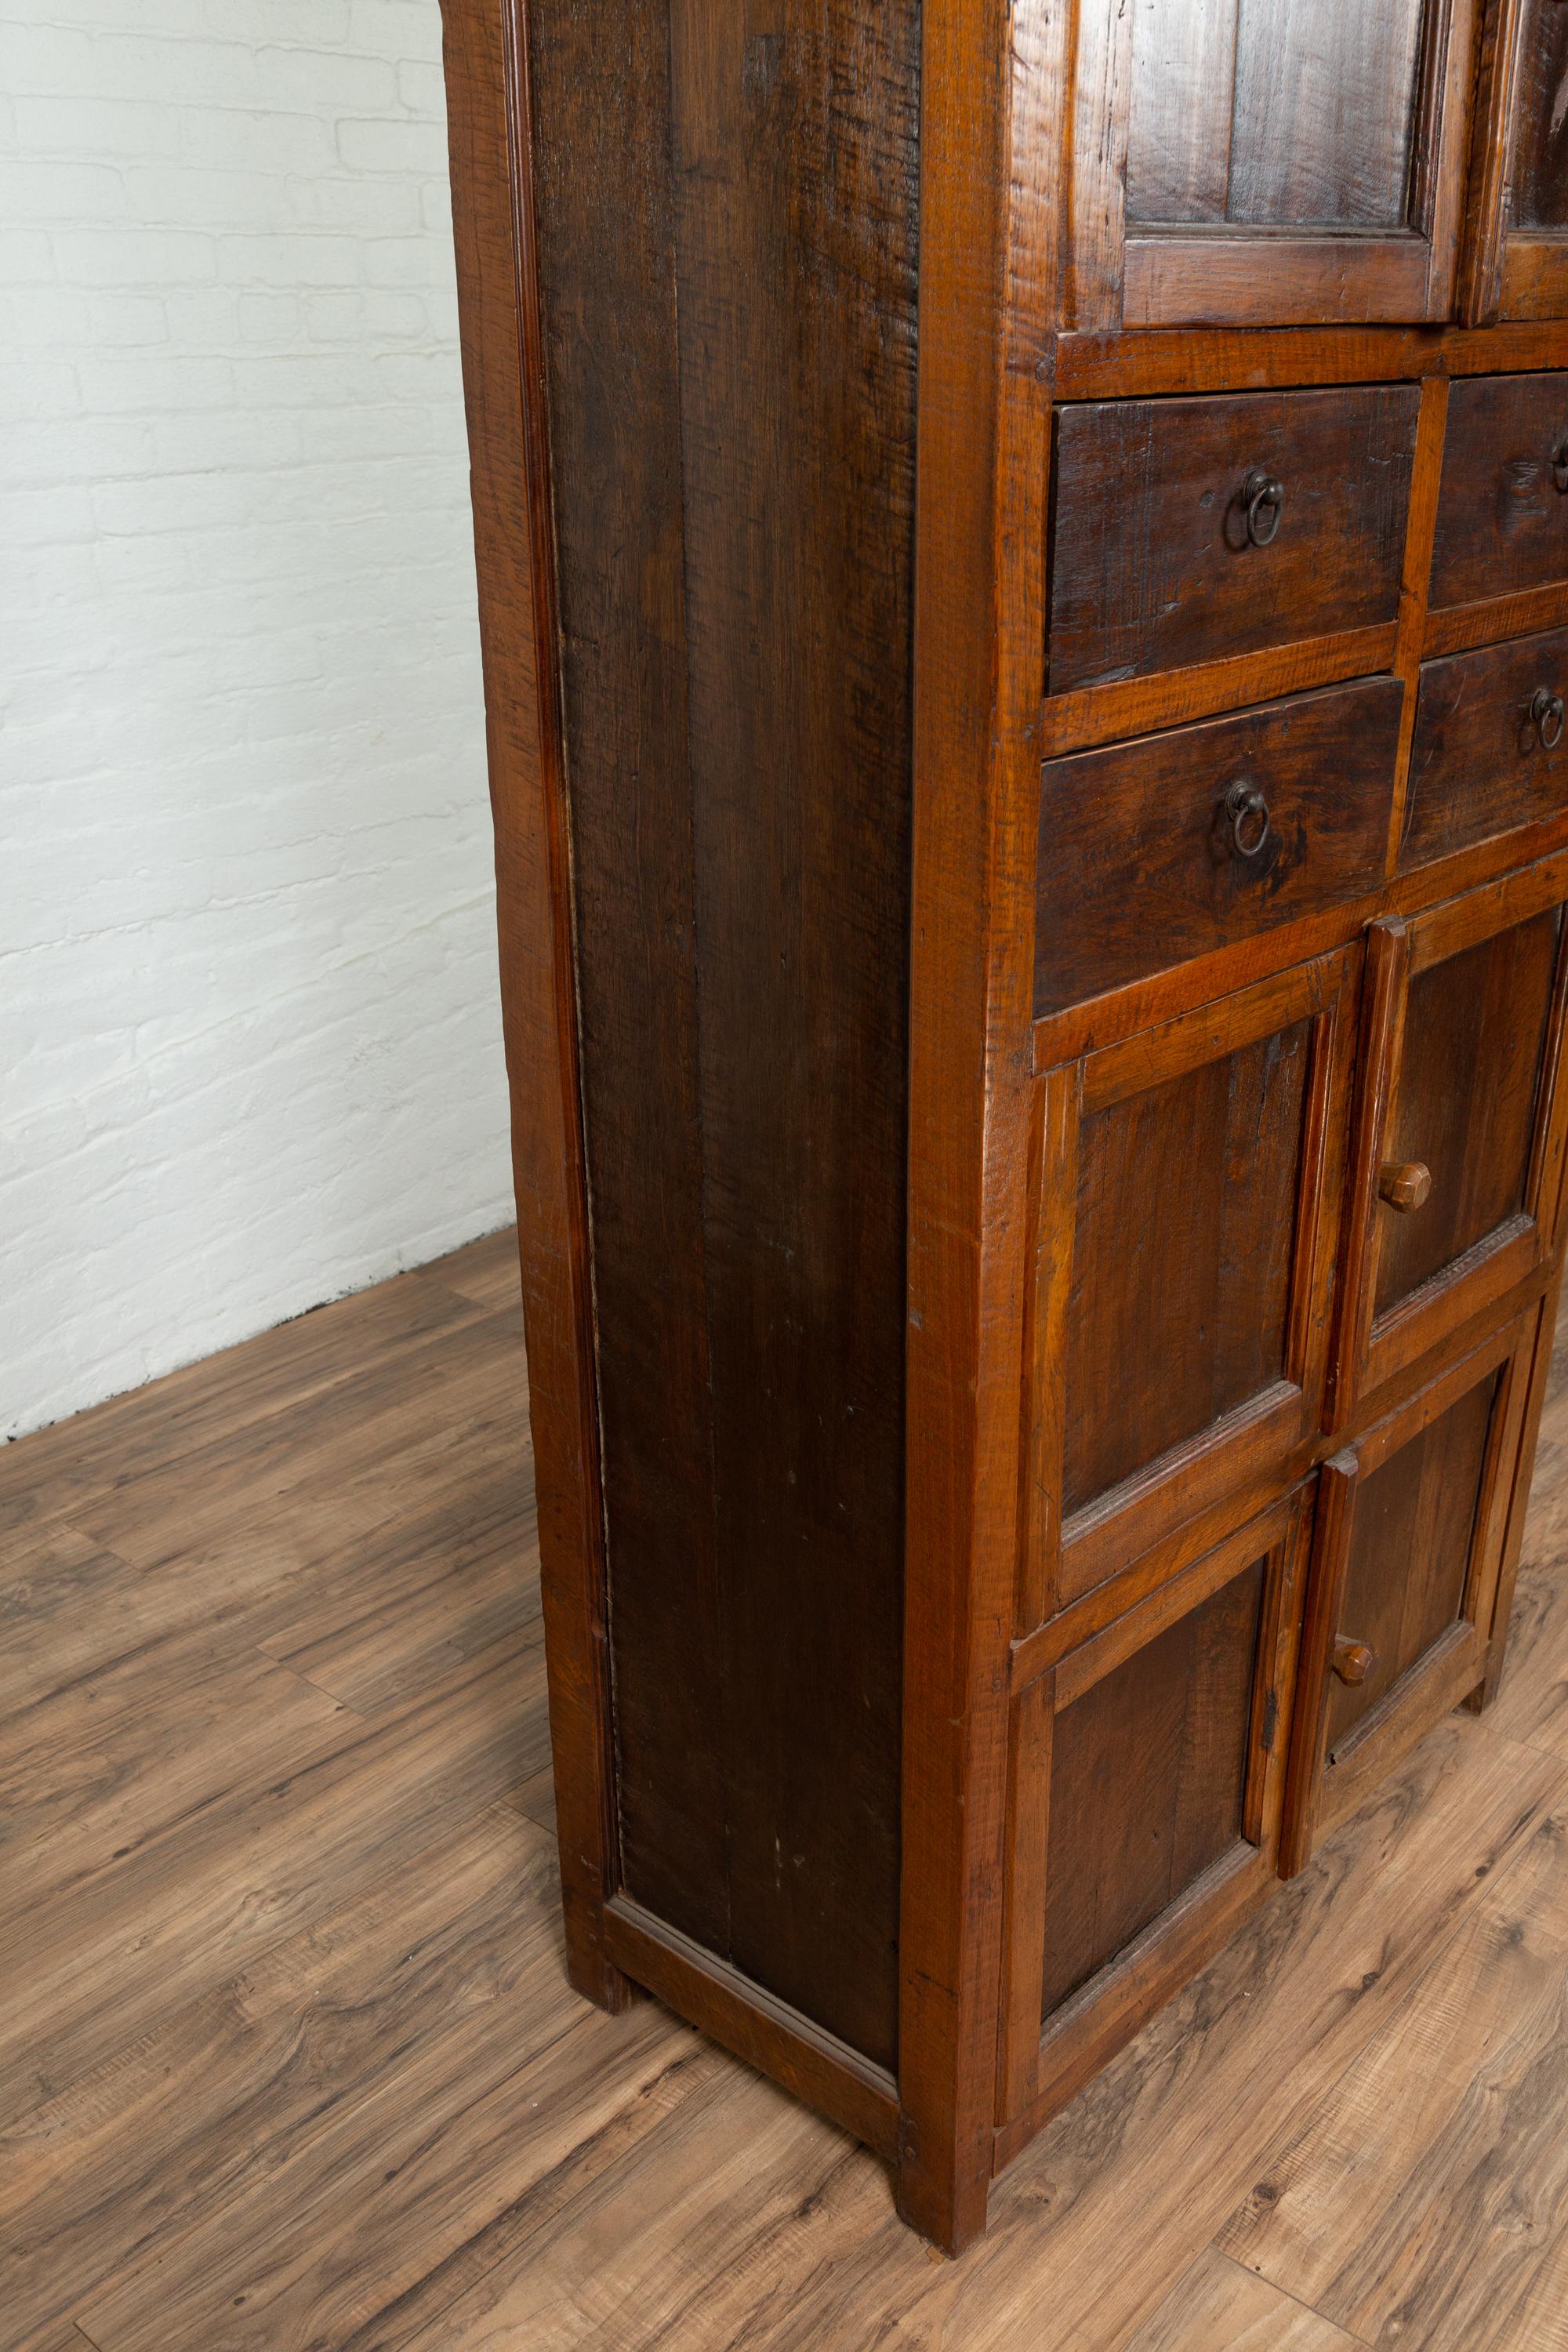 Tall Antique Javanese Teak Wood Cabinet with Four Double Doors and Drawers 8